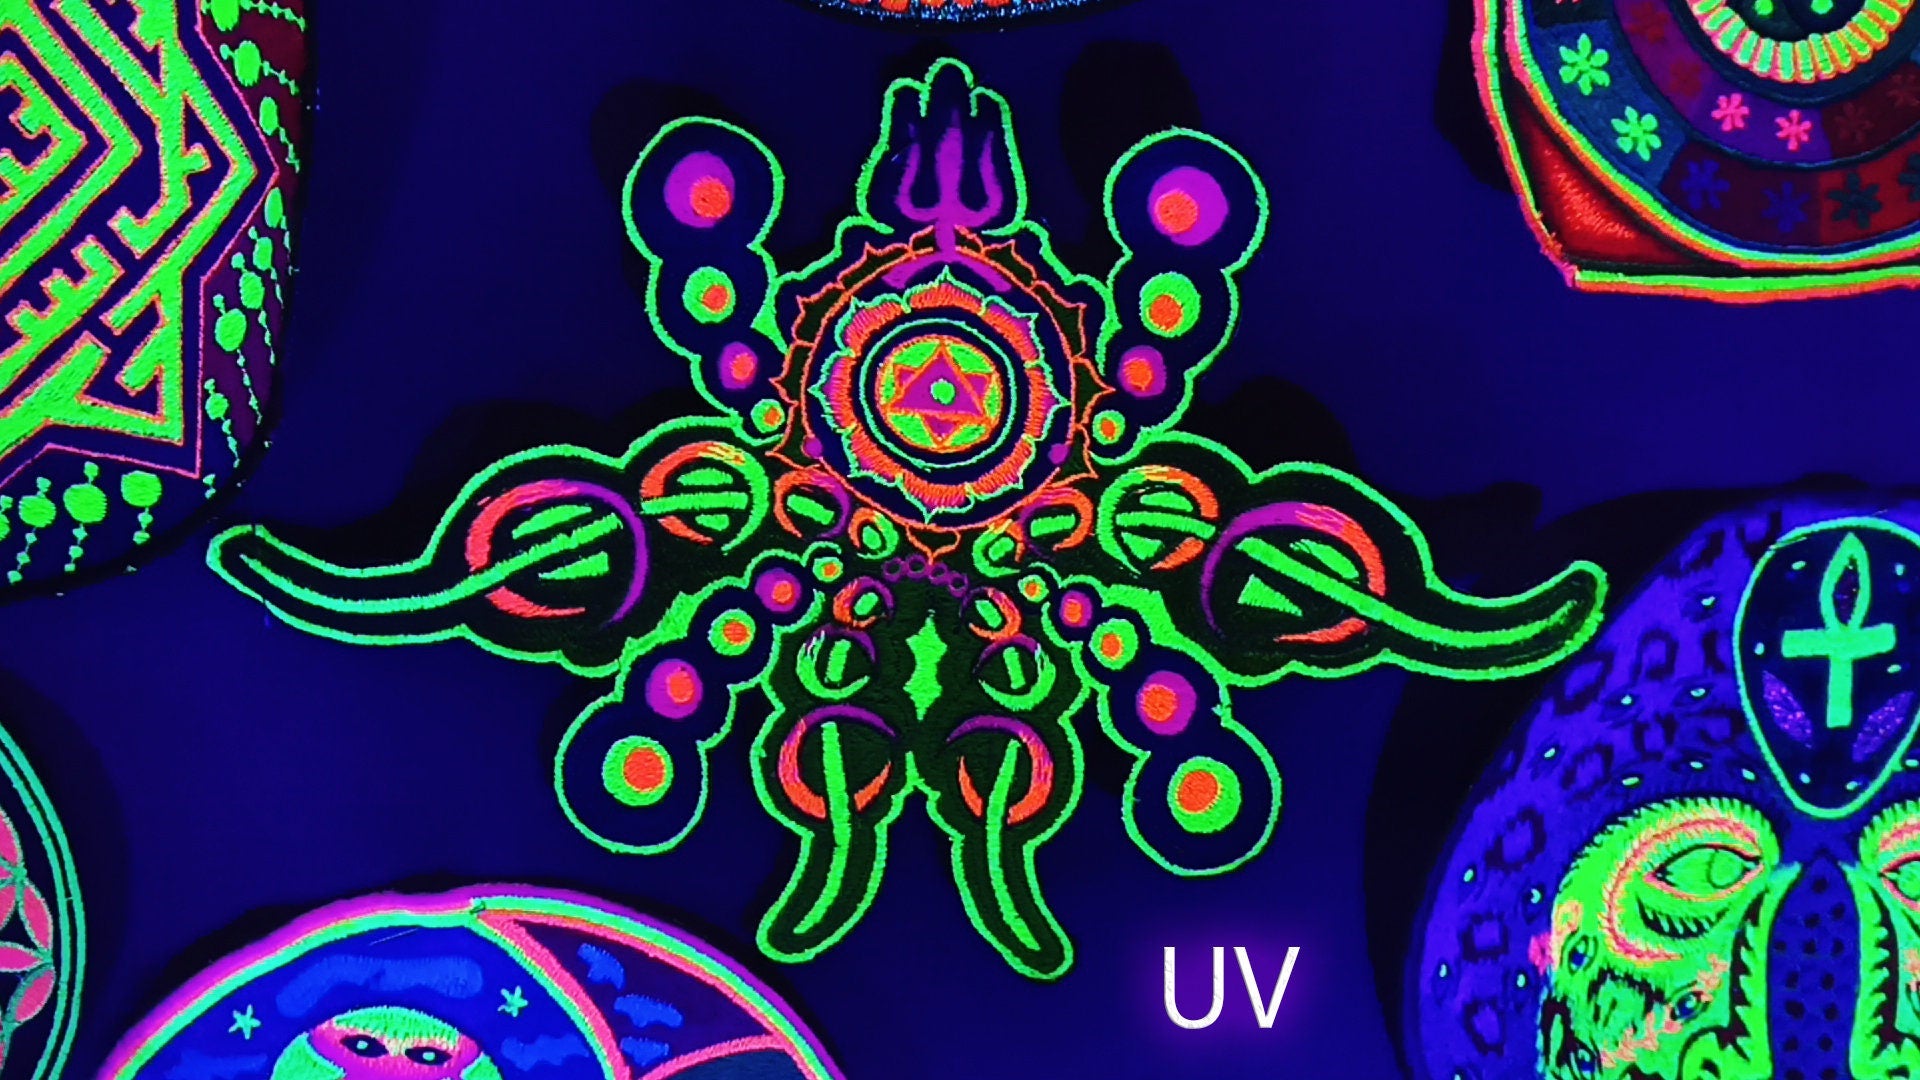 Hyperspace alien embroidery DMT being blacklight glowing UV active psychedelic patch